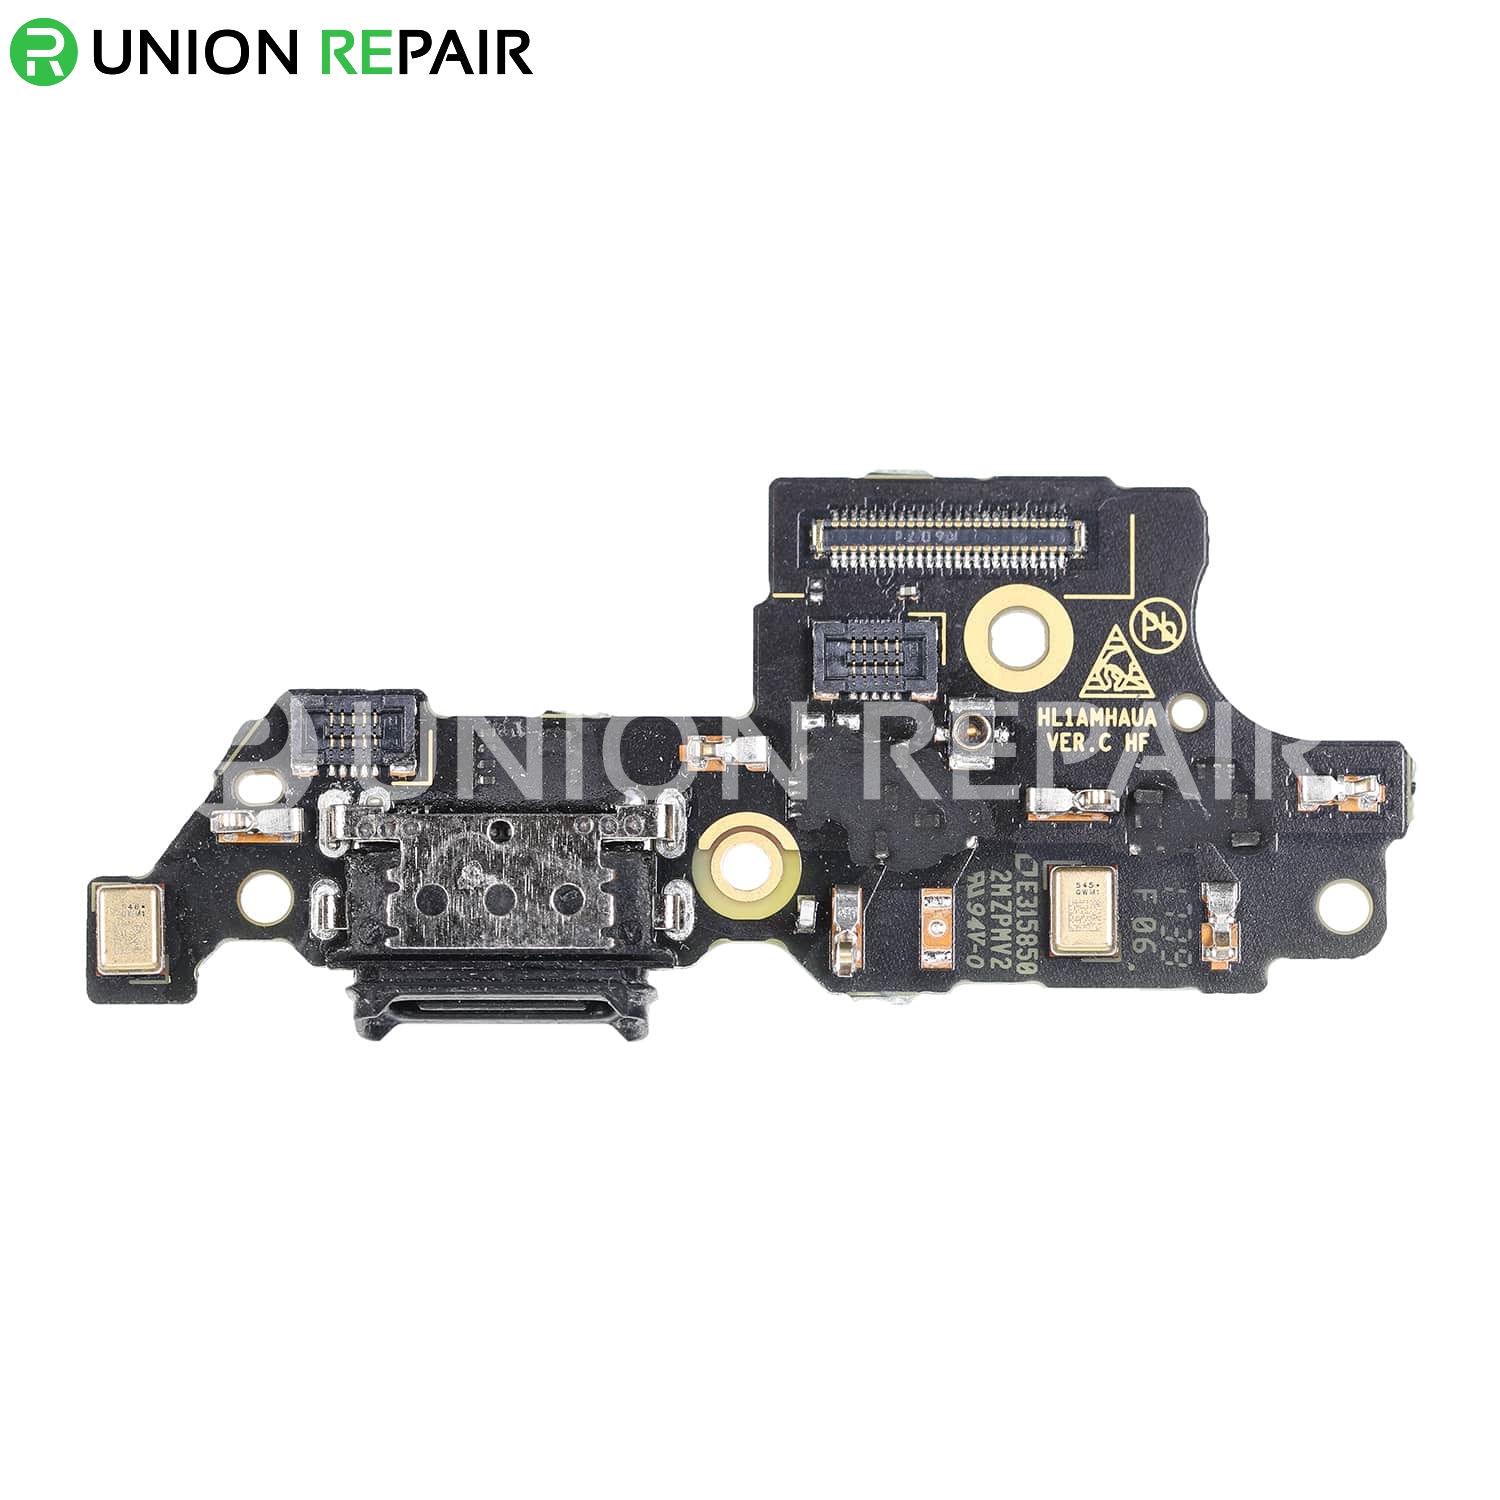 Replacement for Huawei Mate 9 Charging Port PCB Board